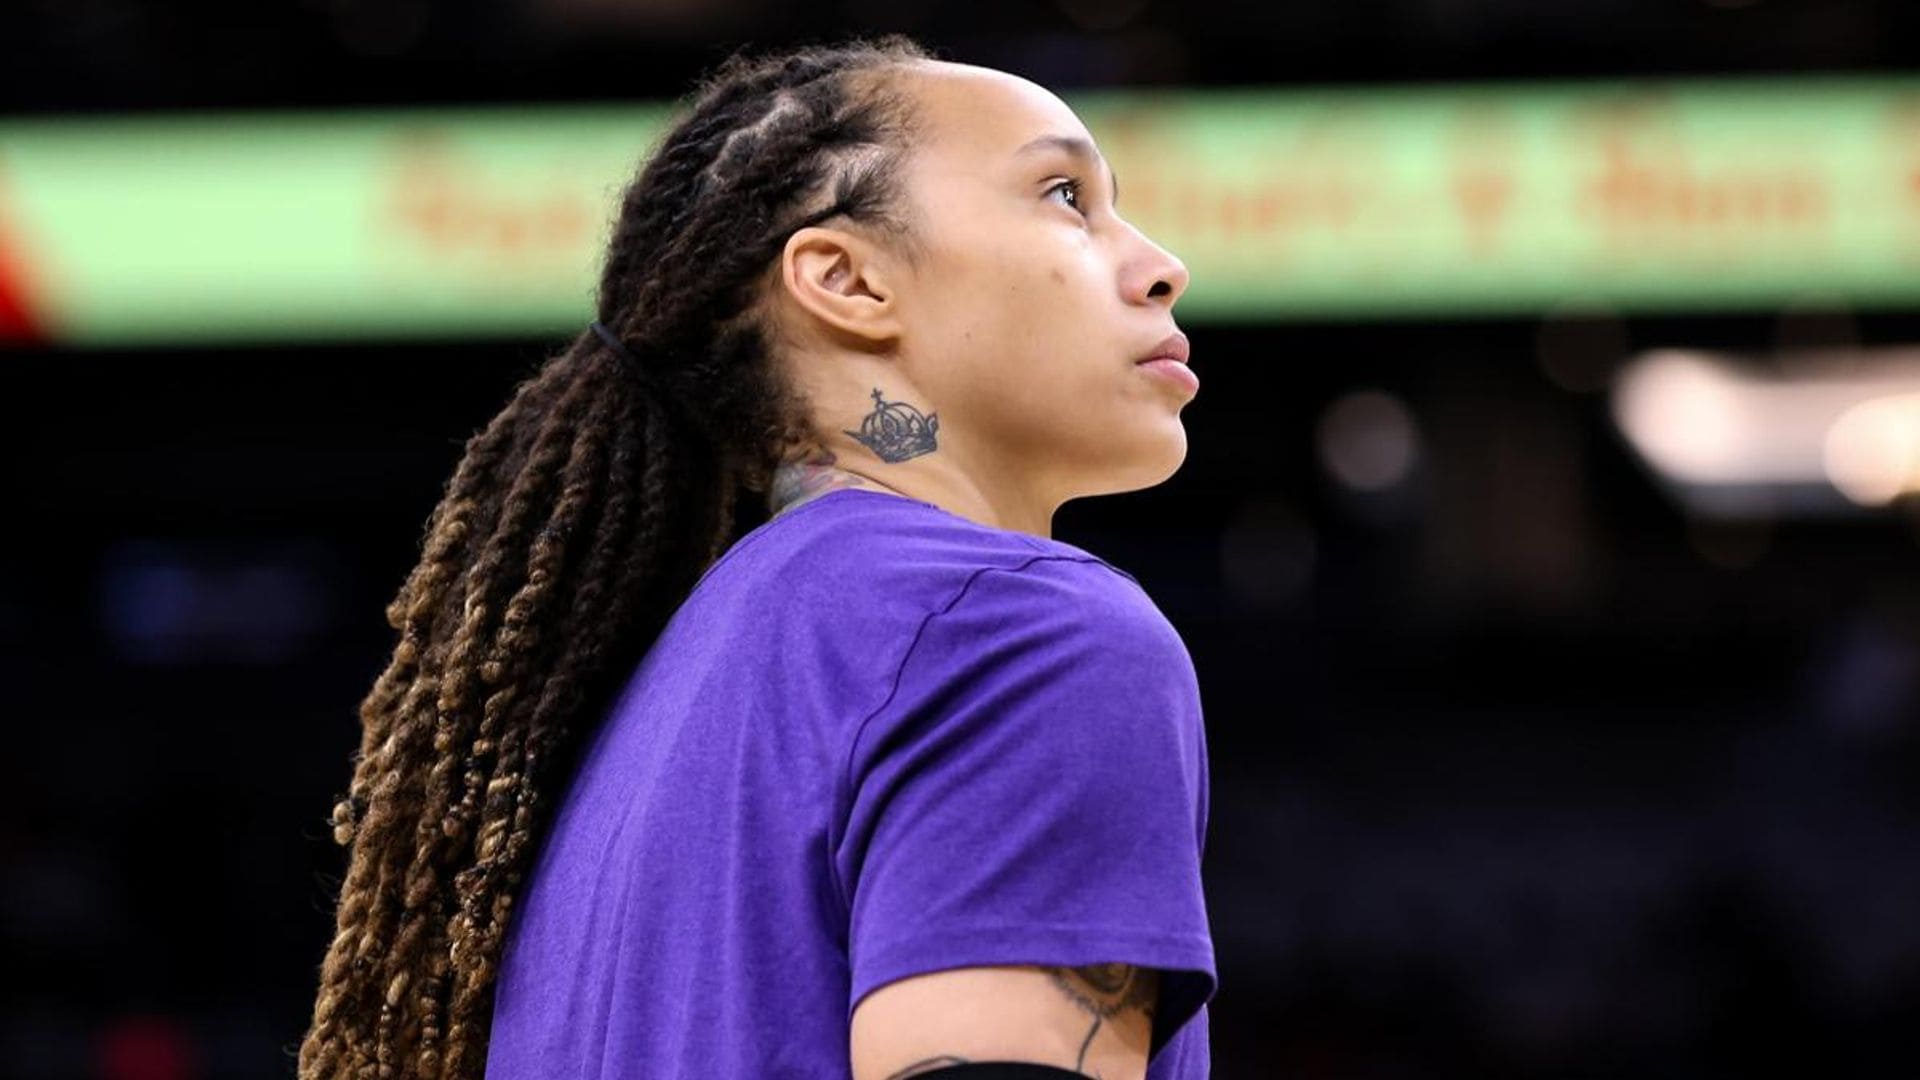 Brittney Griner releases an official statement announcing she is back home and will return to the WNBA